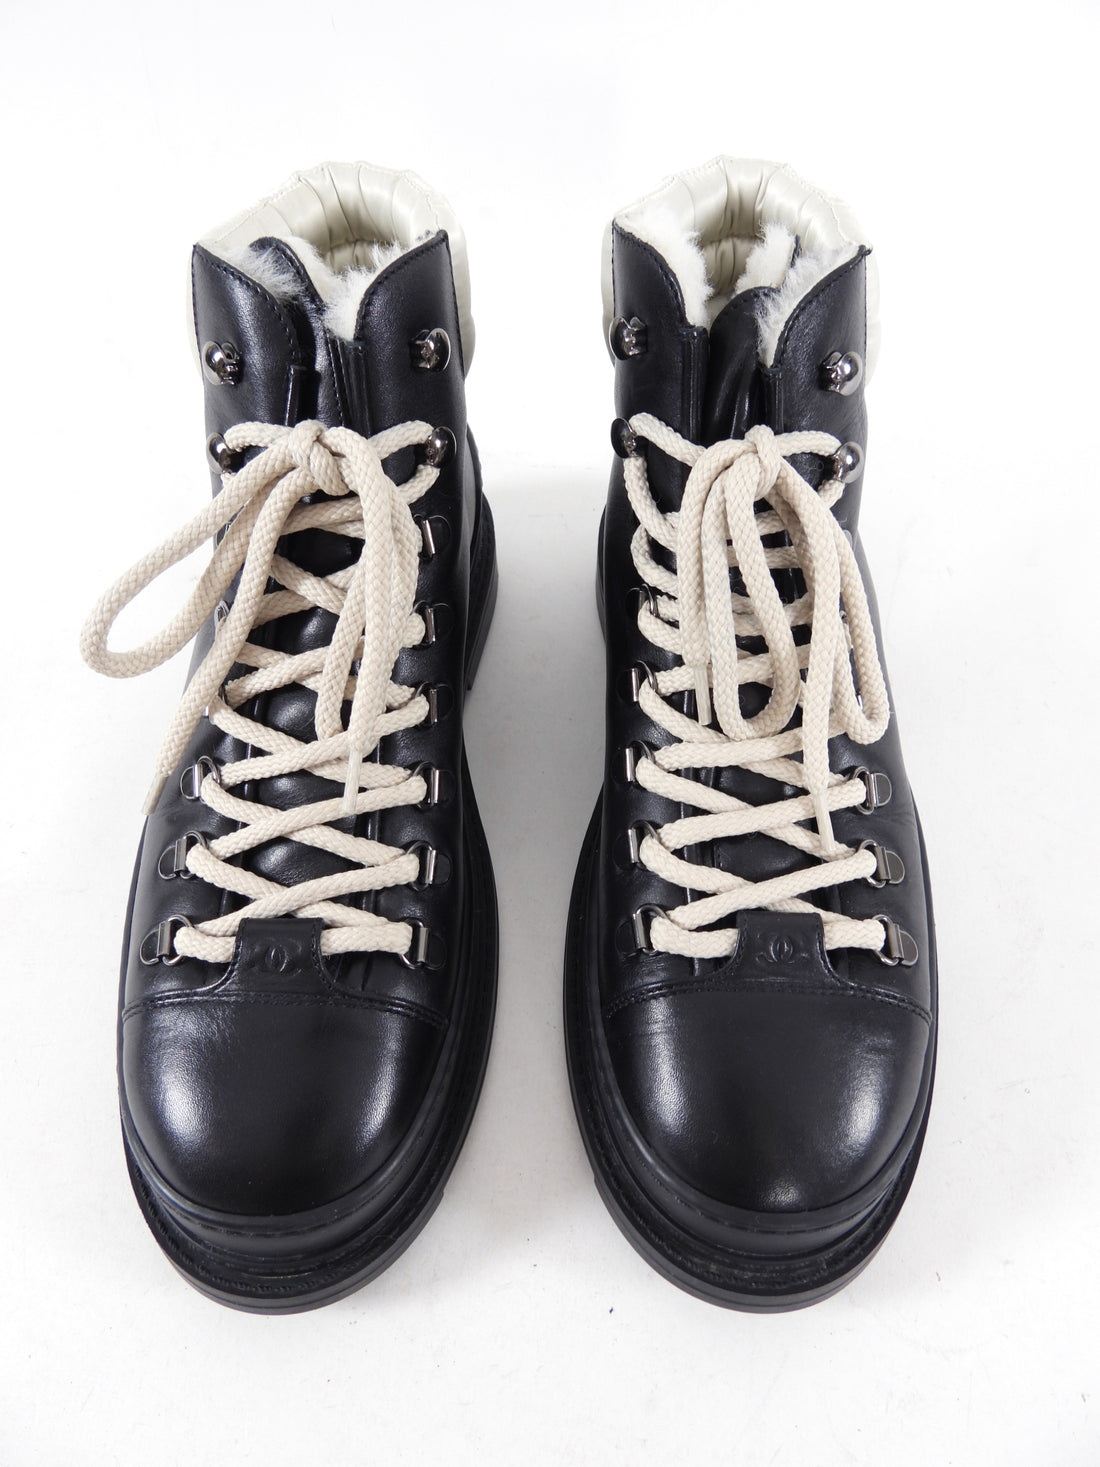 Chanel Black White Logo Lace Up Fall Winter Combat ankle Boots EU 36.5 –  HelensChanel